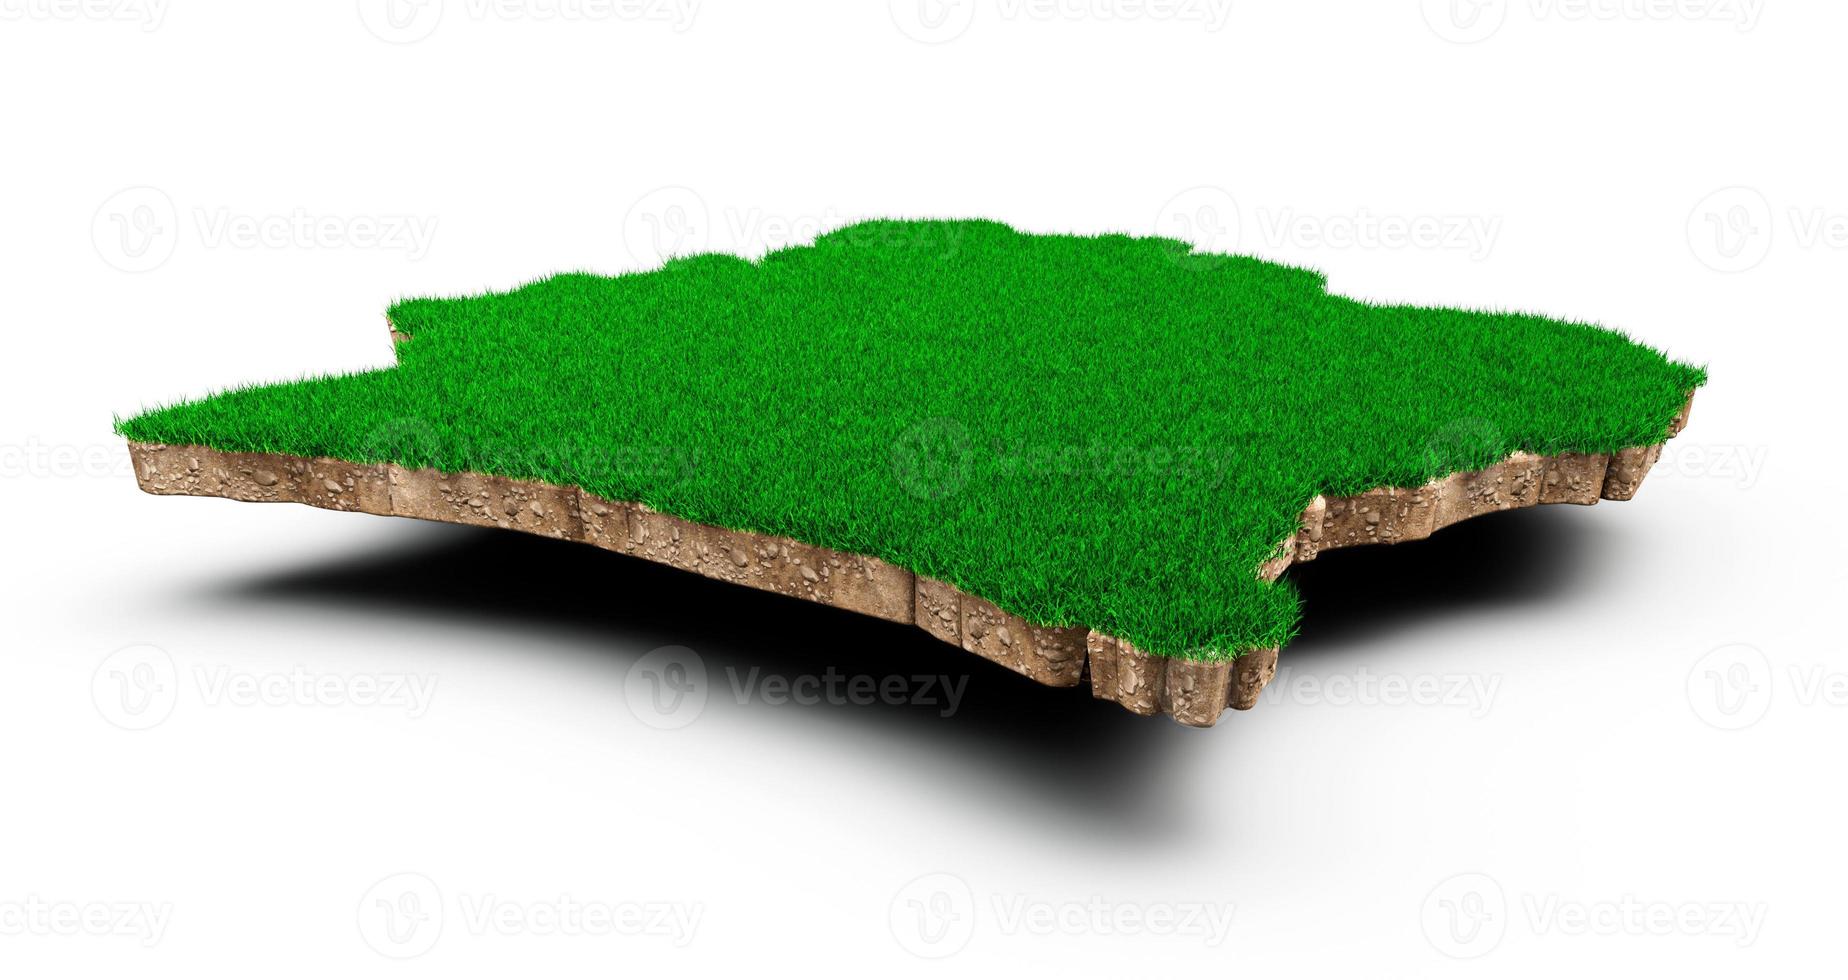 Ivory Coast Map soil land geology cross section with green grass and Rock ground texture 3d illustration photo